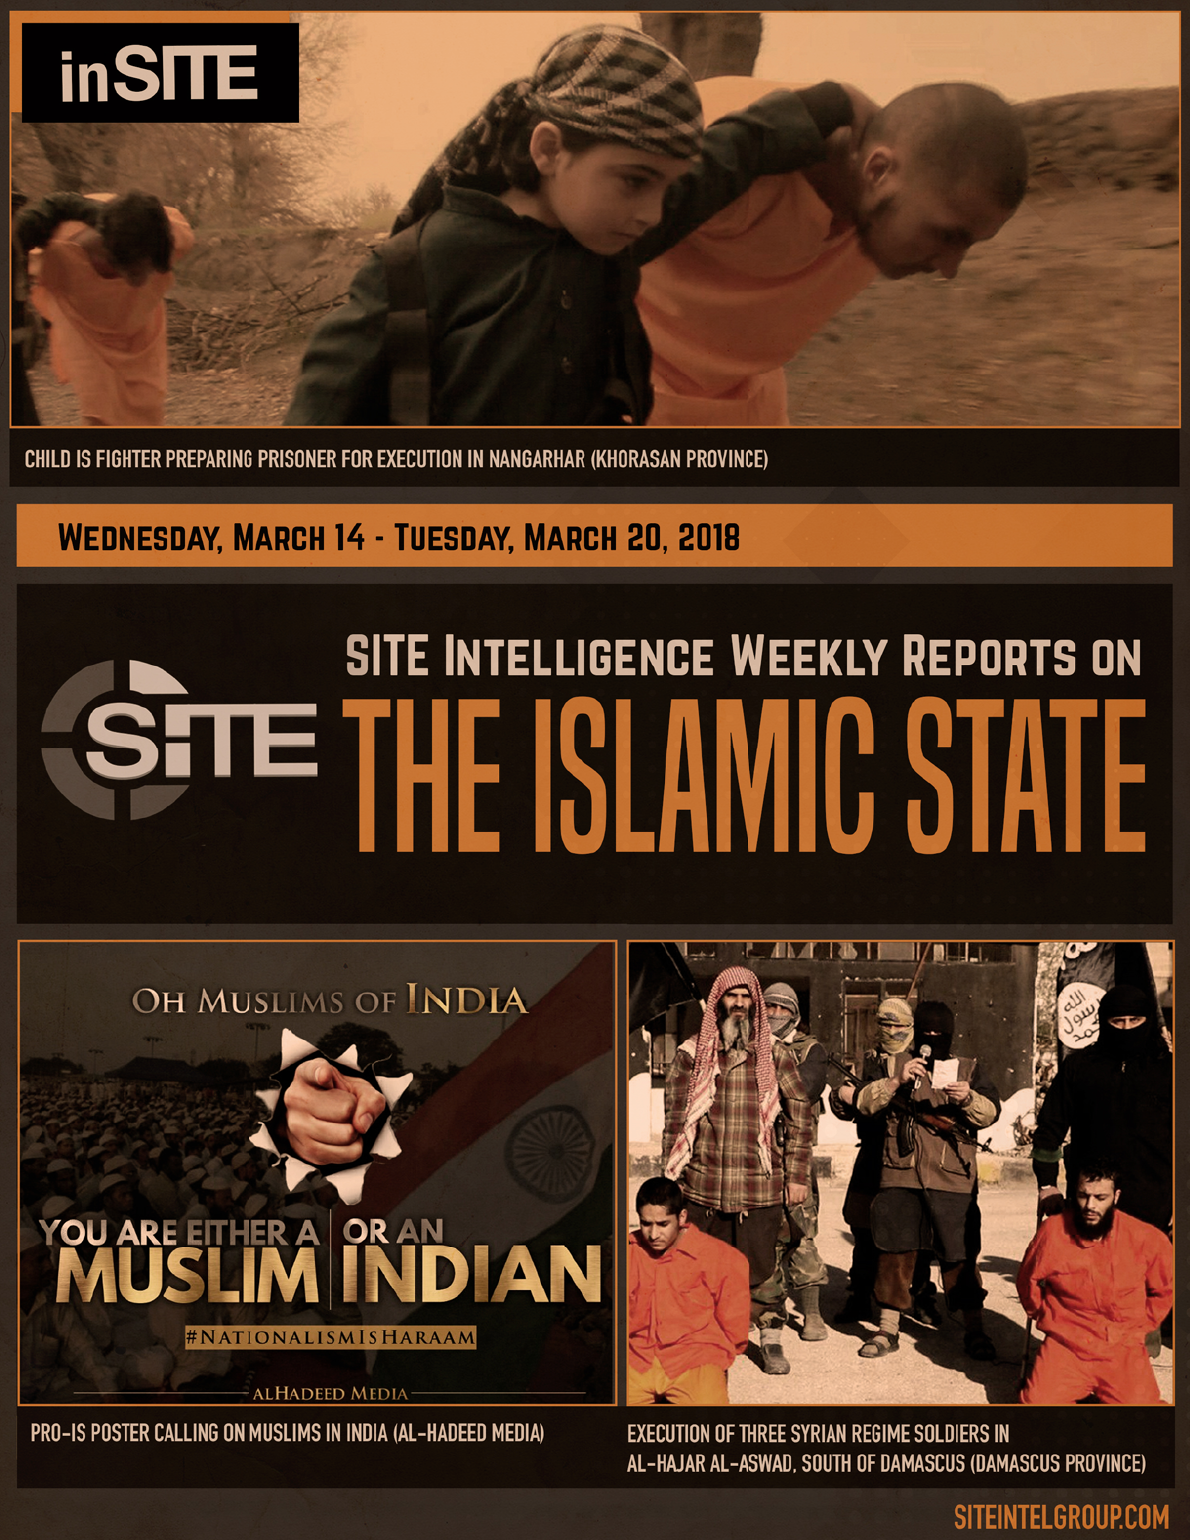 Weekly inSITE on the Islamic State for March 14-20, 2018